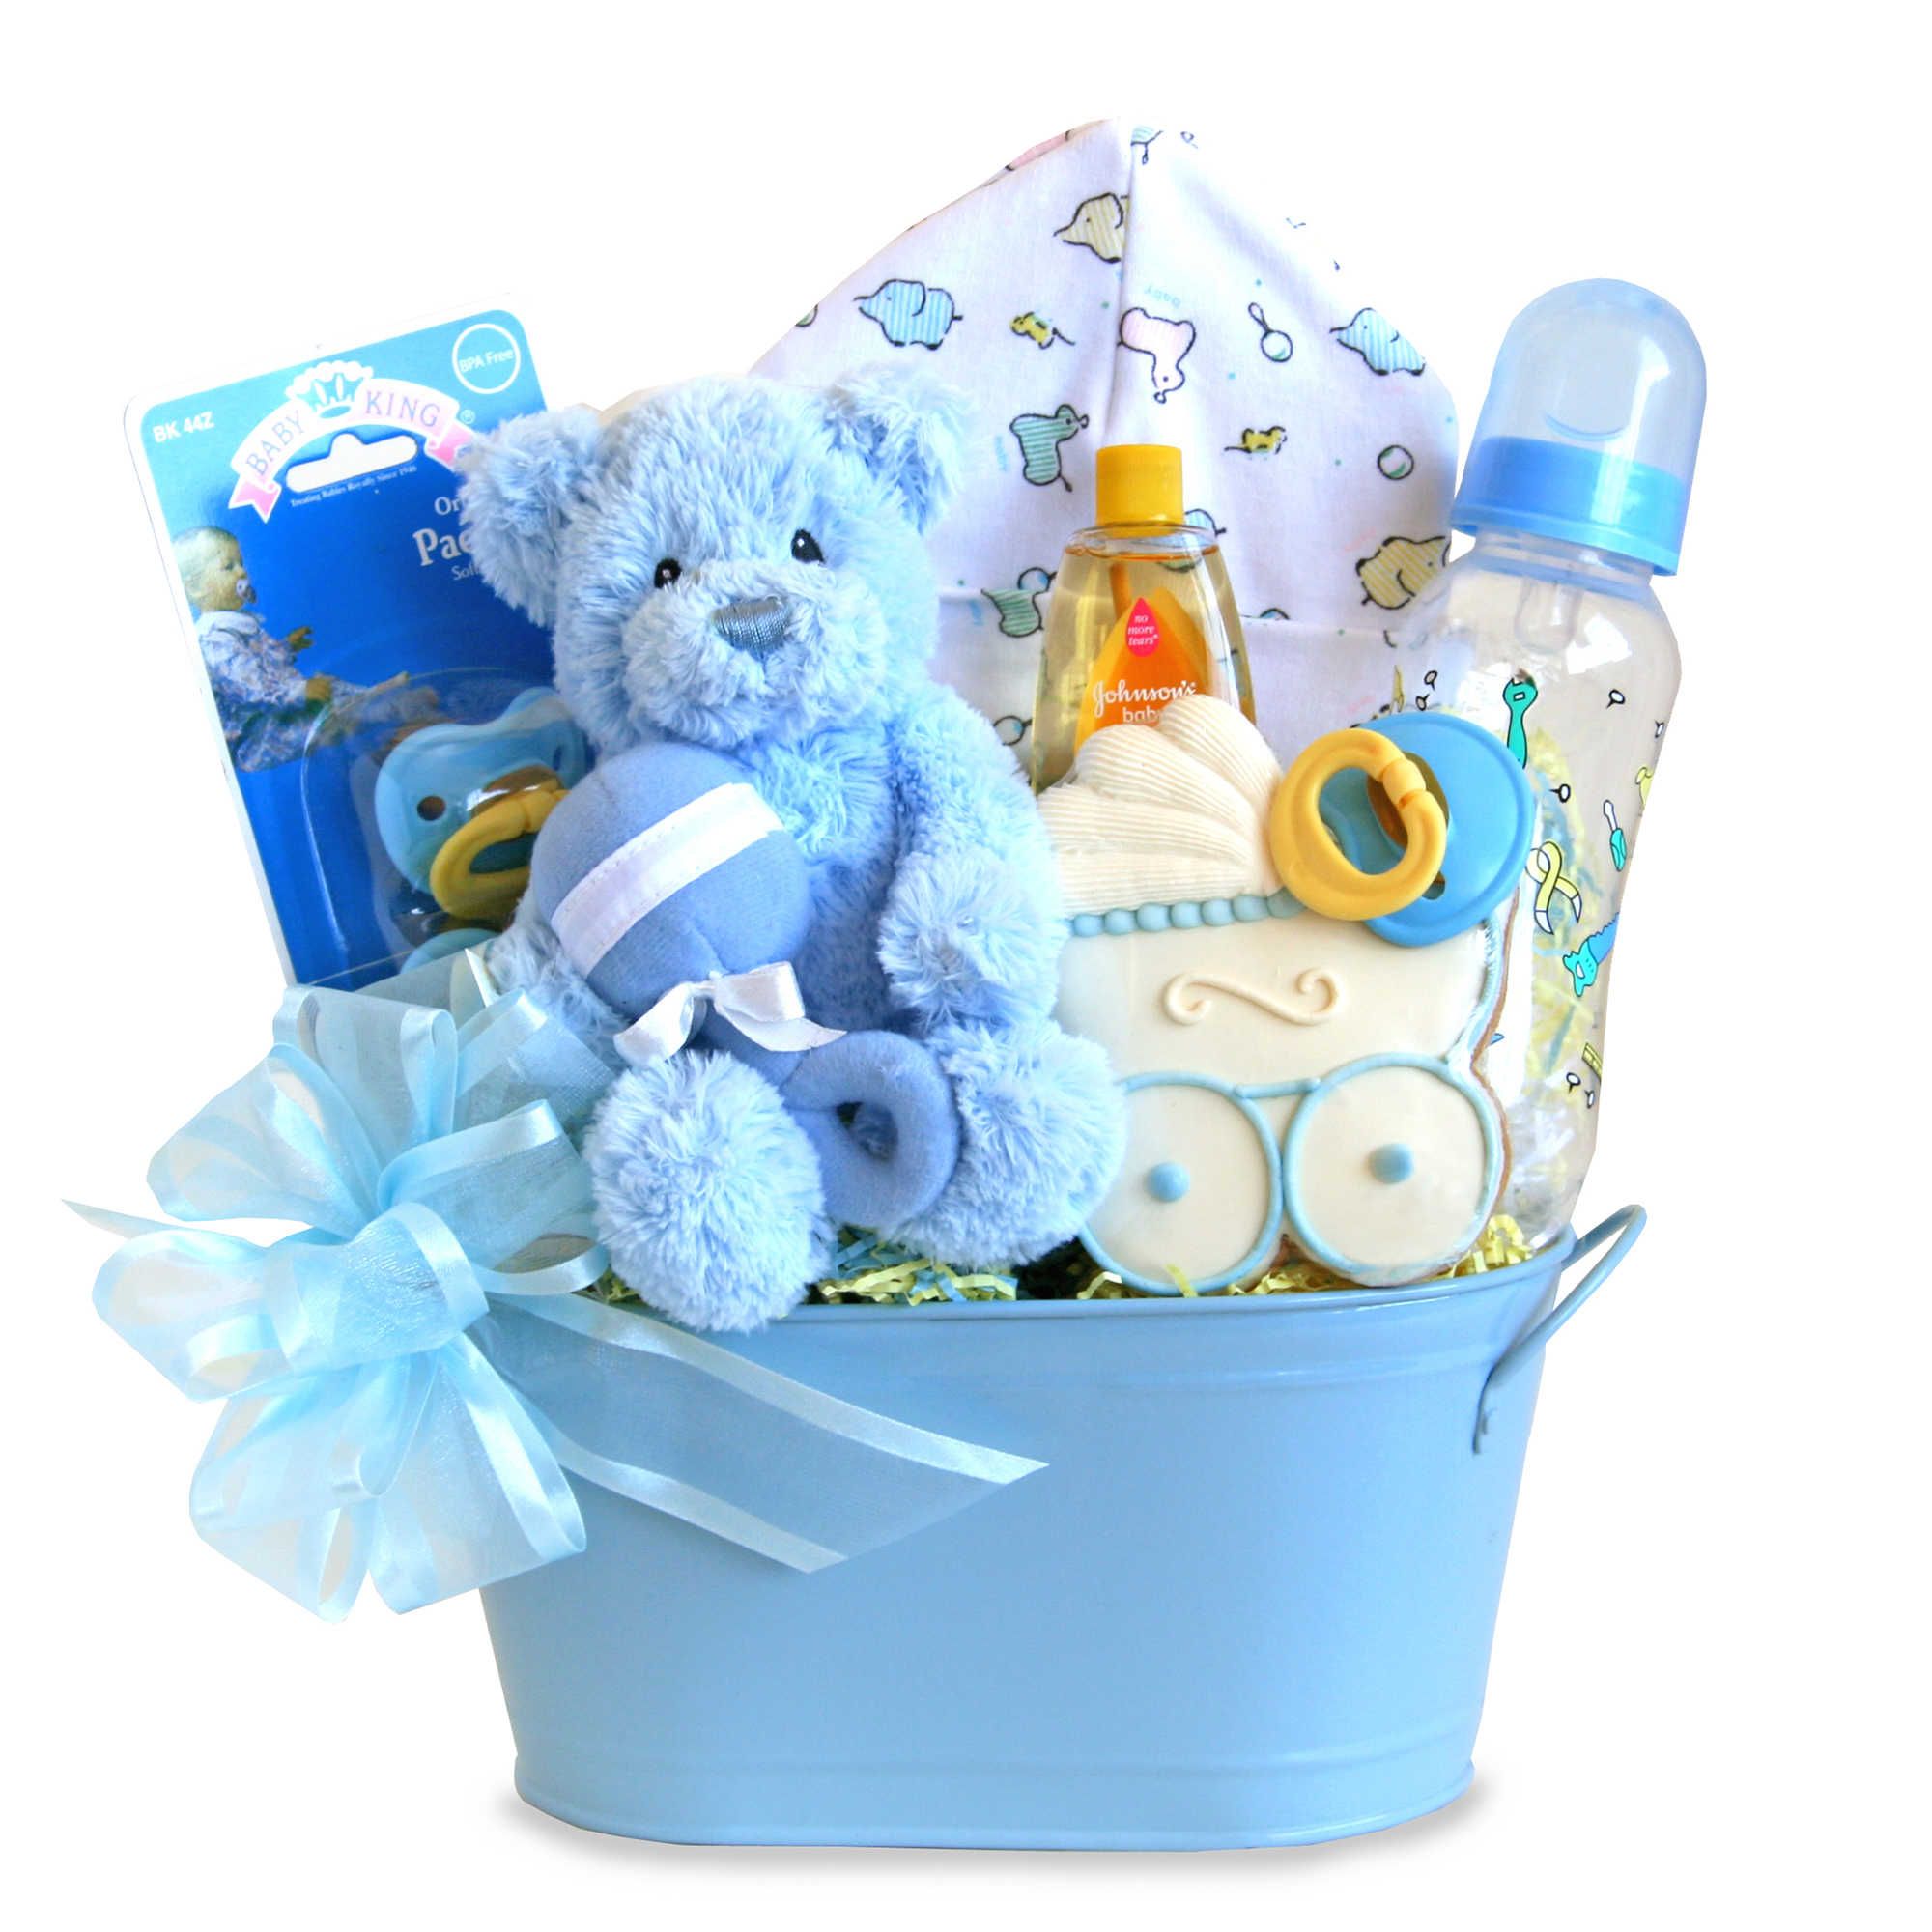 Cuddly Welcome for Baby Boy Gift Set